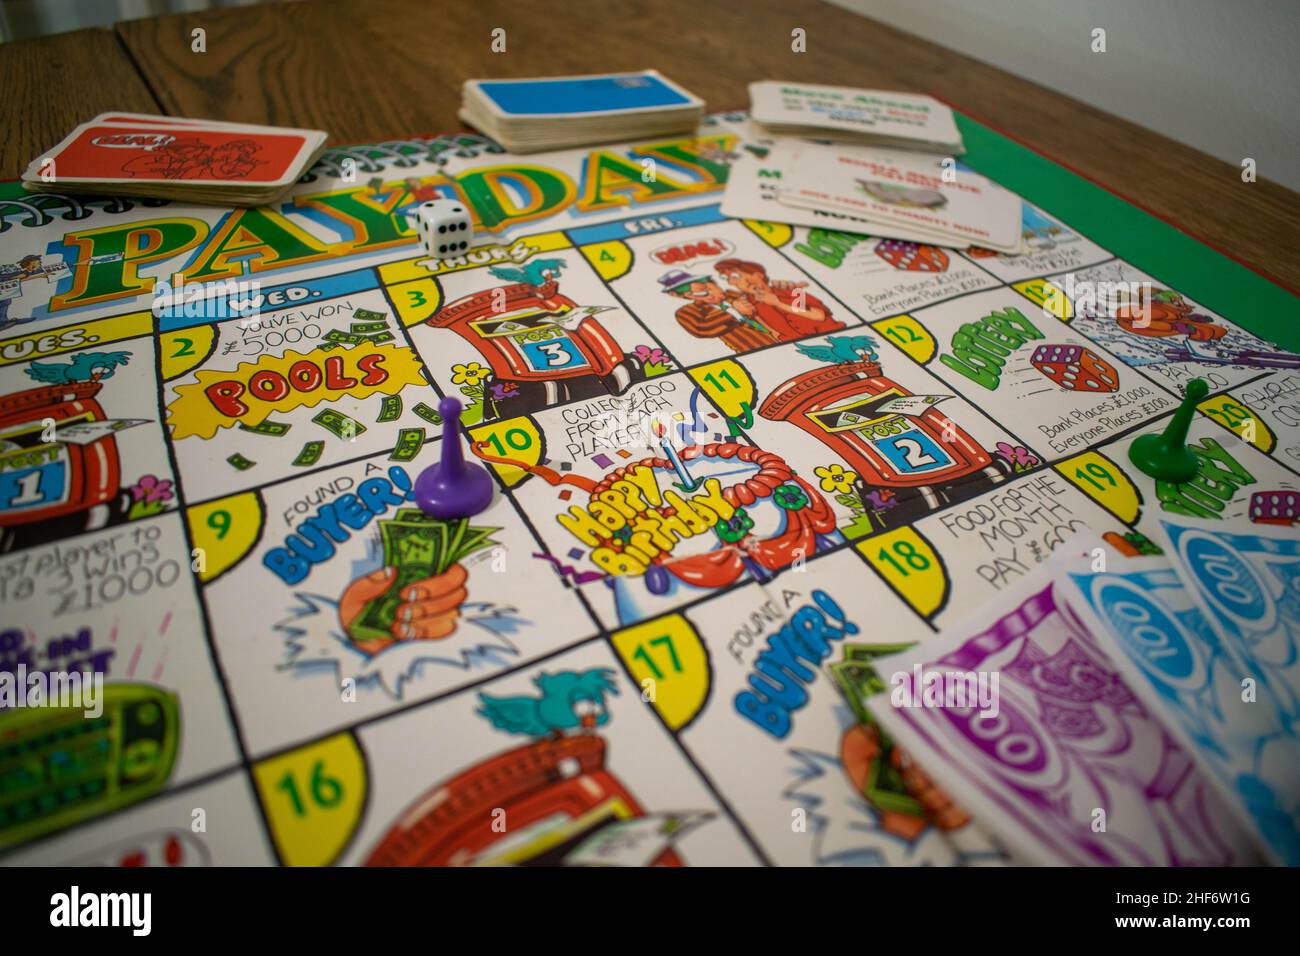 Durham, UK - 20th July 2019: Waddingtons Payday board game. Money Management. Pay Day is a board game originally made by Parker Brothers (now a subsid Stock Photo